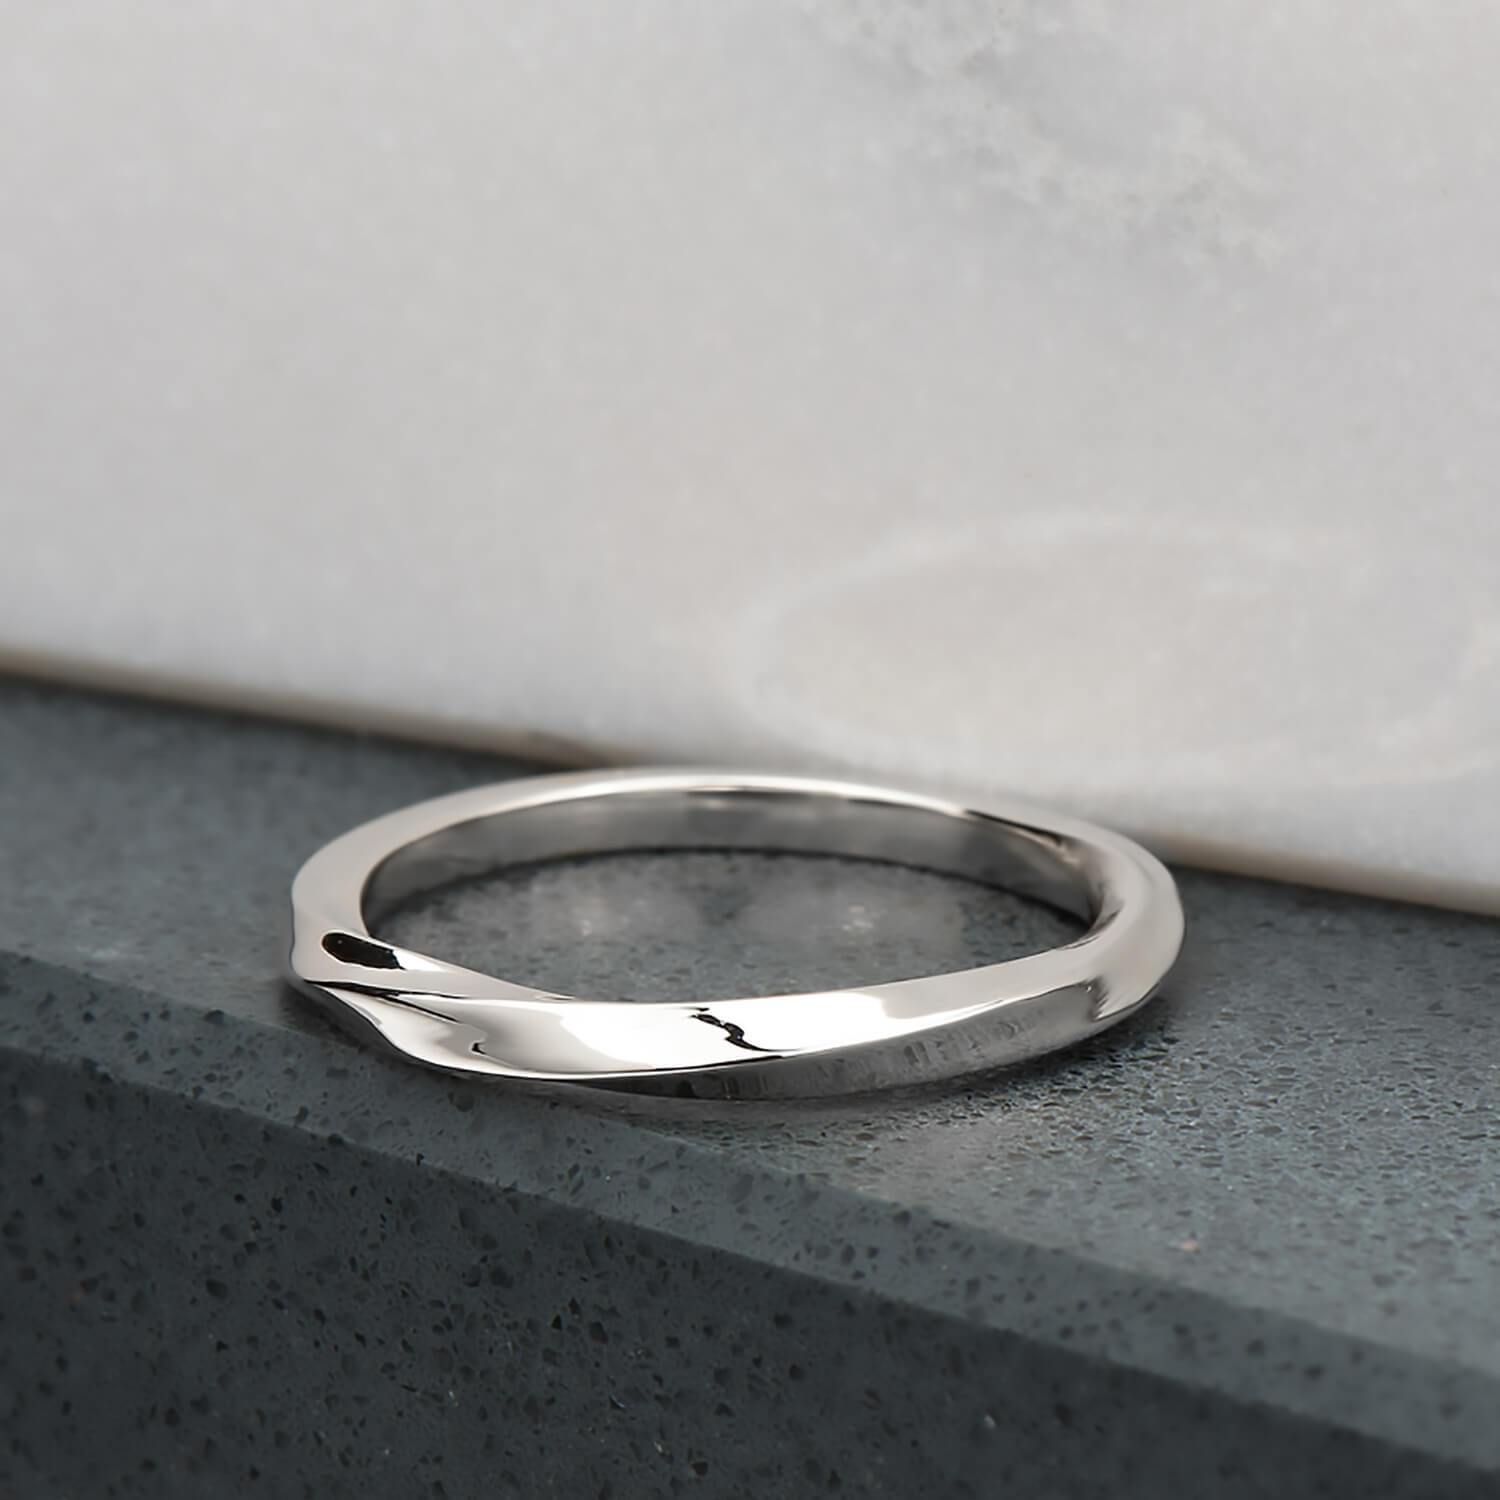 Recycled sterling silver with a half twist, the ring is 2mm in its width & thickness. It has been finished with a high mirror polish.